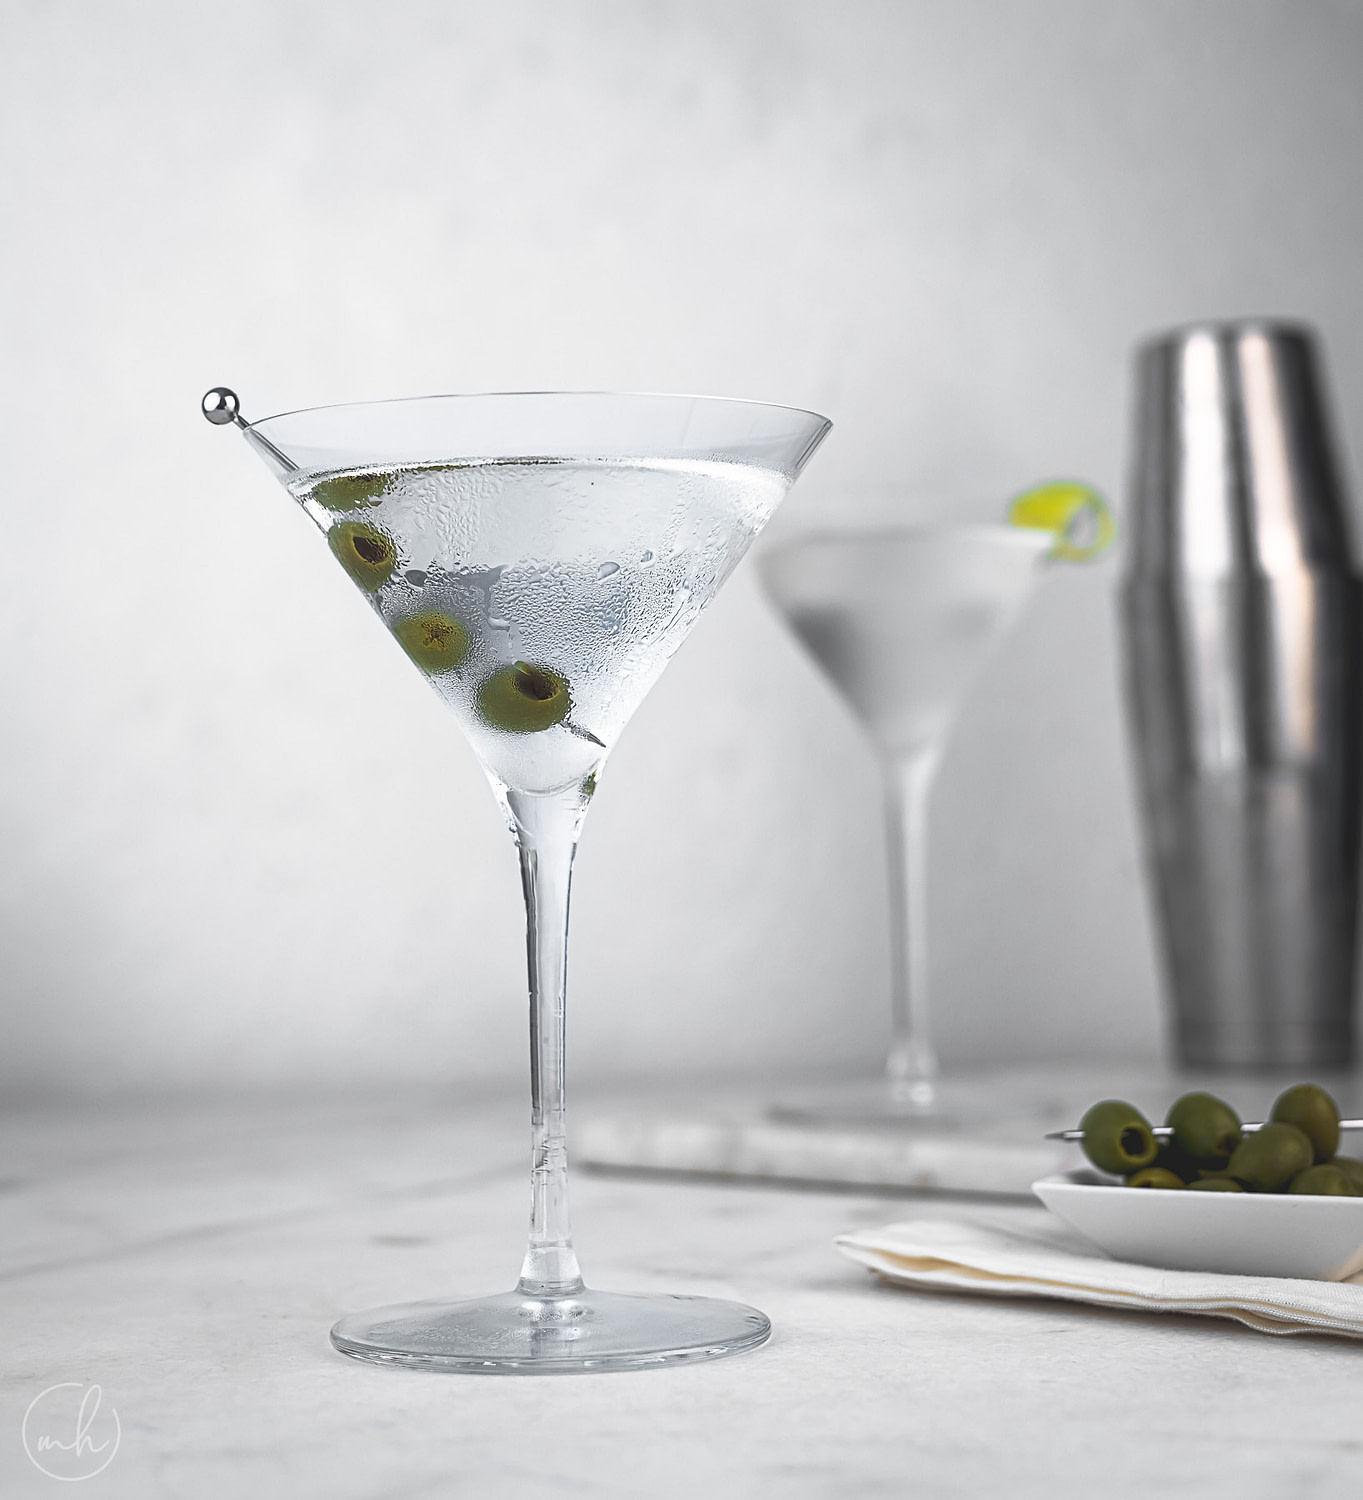 A martini cocktail glass with olives as garnish. In the backgroun, another martini glass, a bowl of olives and a shaker is placed.